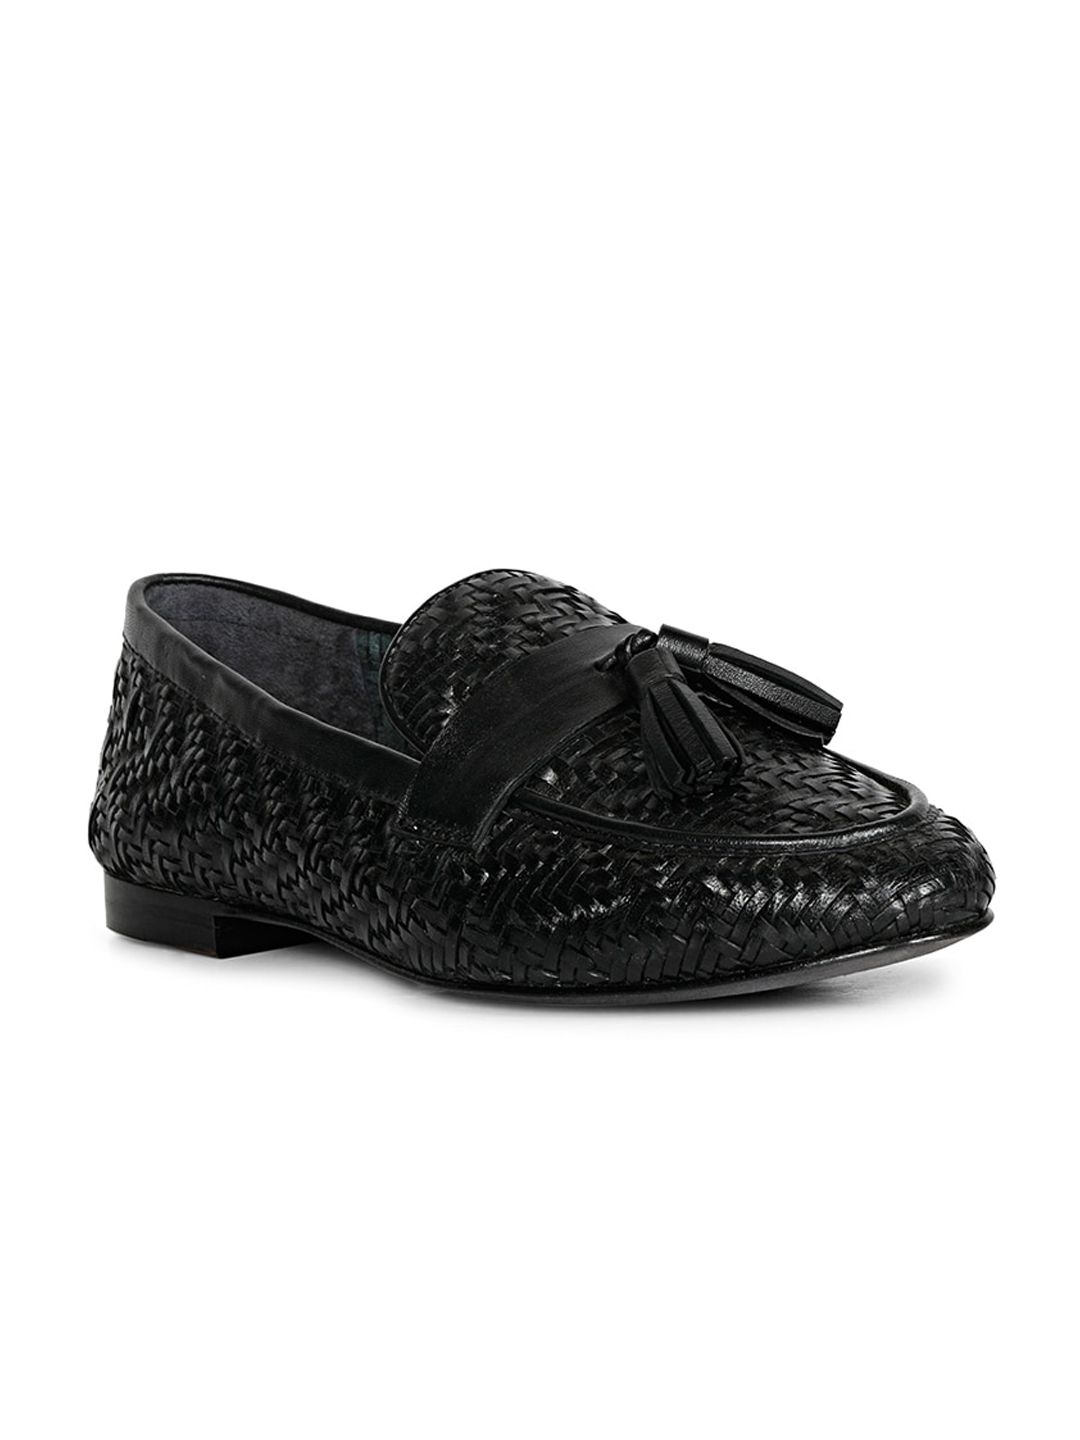 Saint G Women Black Woven Design Leather Loafers Price in India